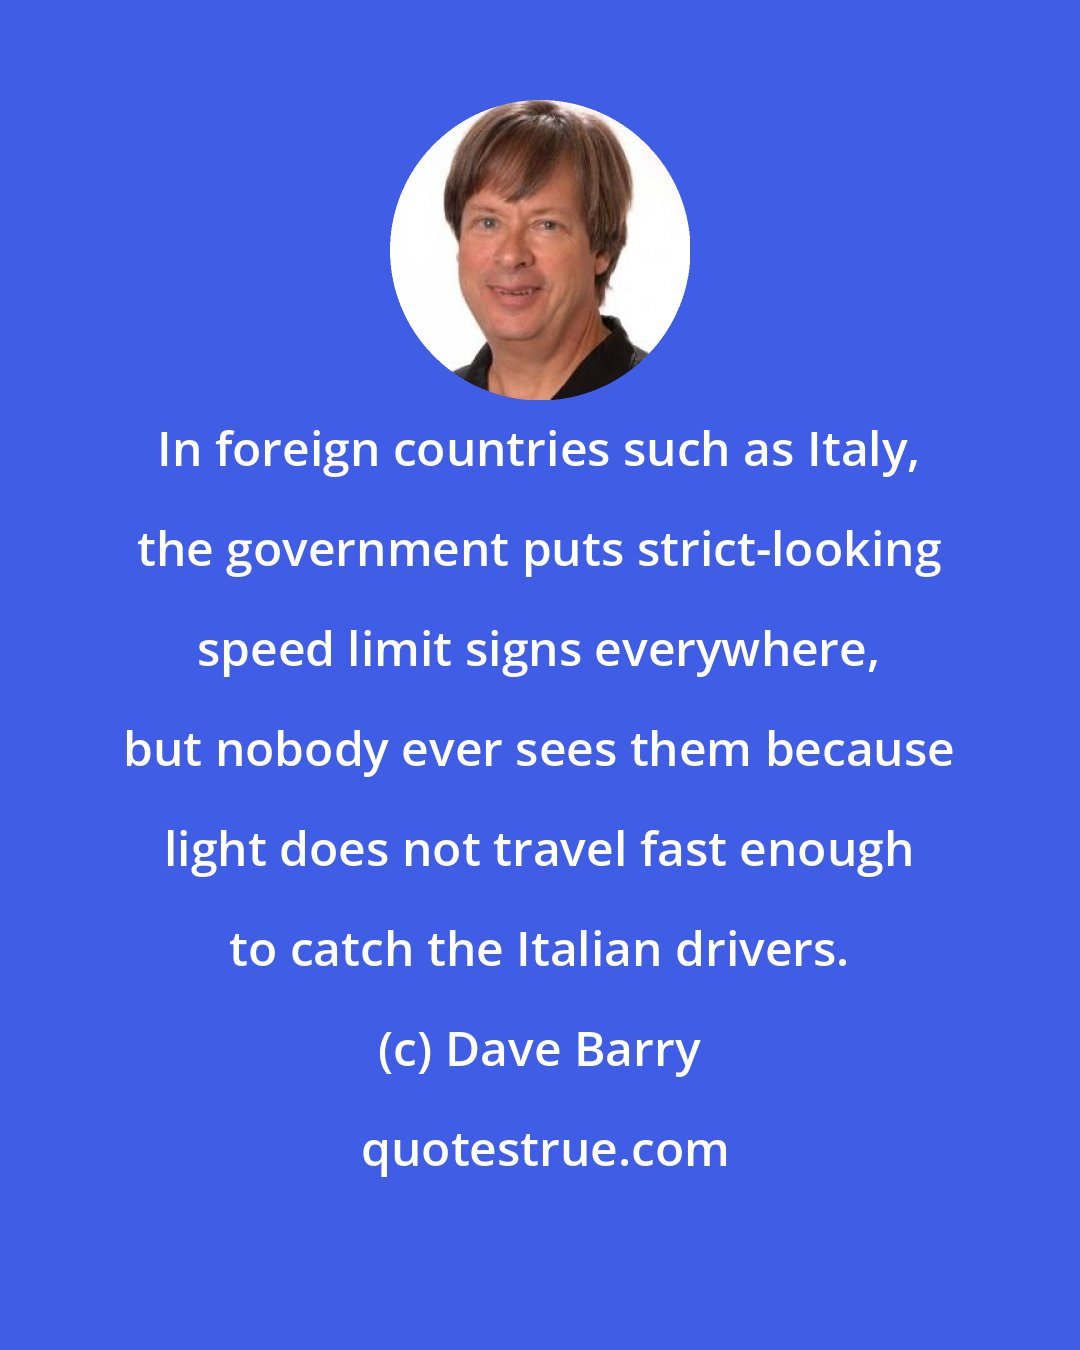 Dave Barry: In foreign countries such as Italy, the government puts strict-looking speed limit signs everywhere, but nobody ever sees them because light does not travel fast enough to catch the Italian drivers.